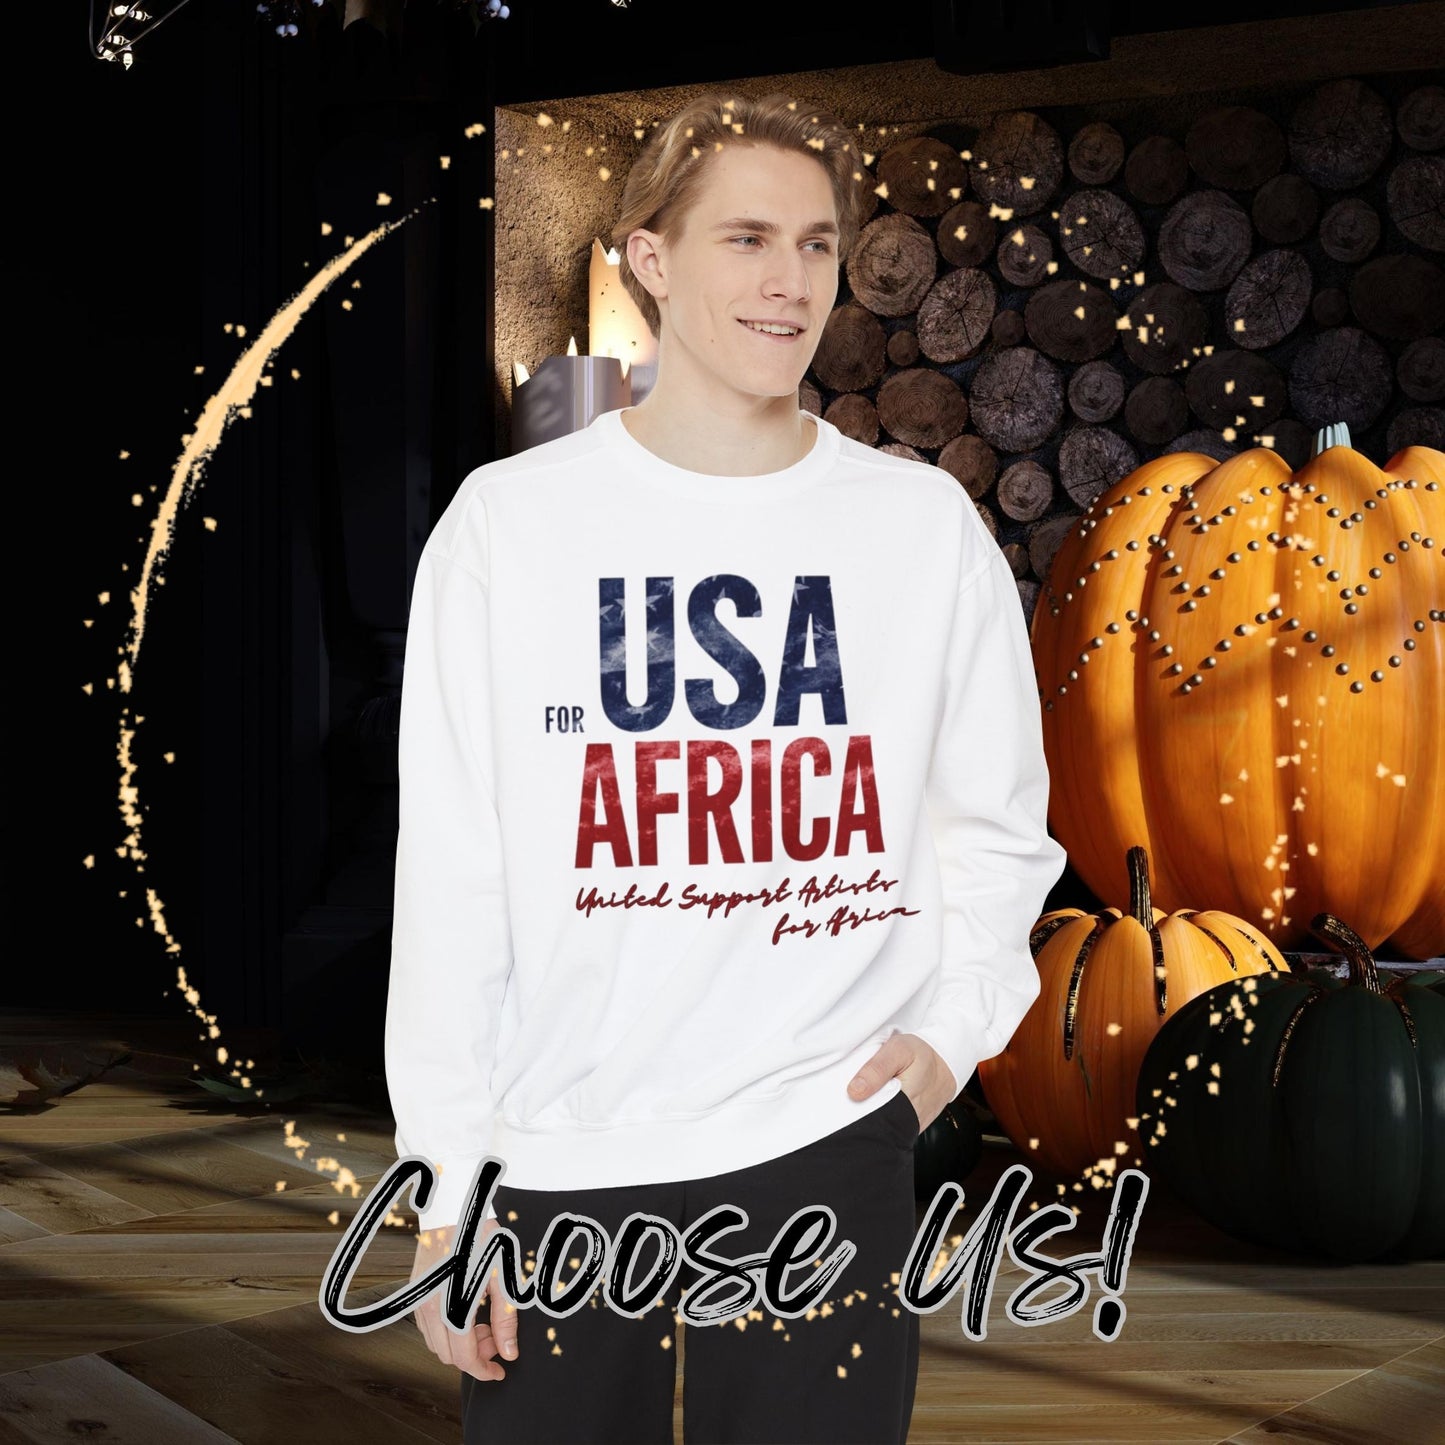 USA For Africa Jumper: Iconic 80s Fashion Remake Worn by Kenny Rogers, Diana Ross, and More – Embrace the Nostalgia of 'We Are the World' Era with This Michael Jackson Inspired Tribute! Sweatshirt   